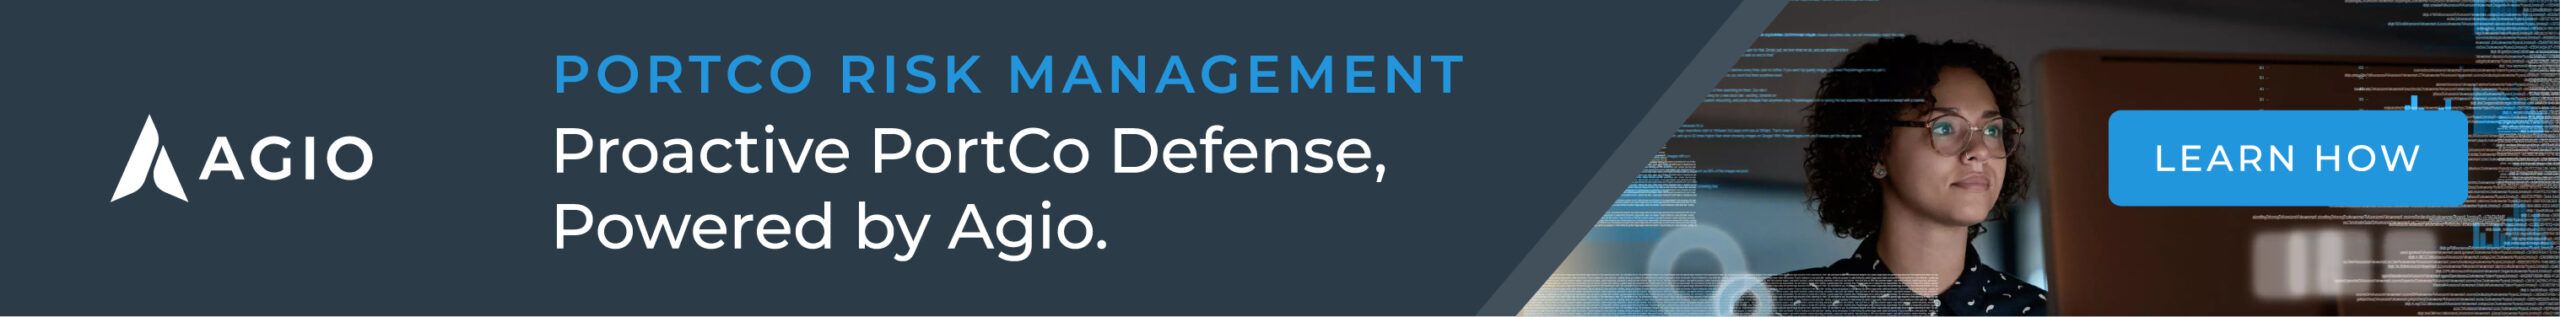 portco risk management proactive portco defense powered by agio